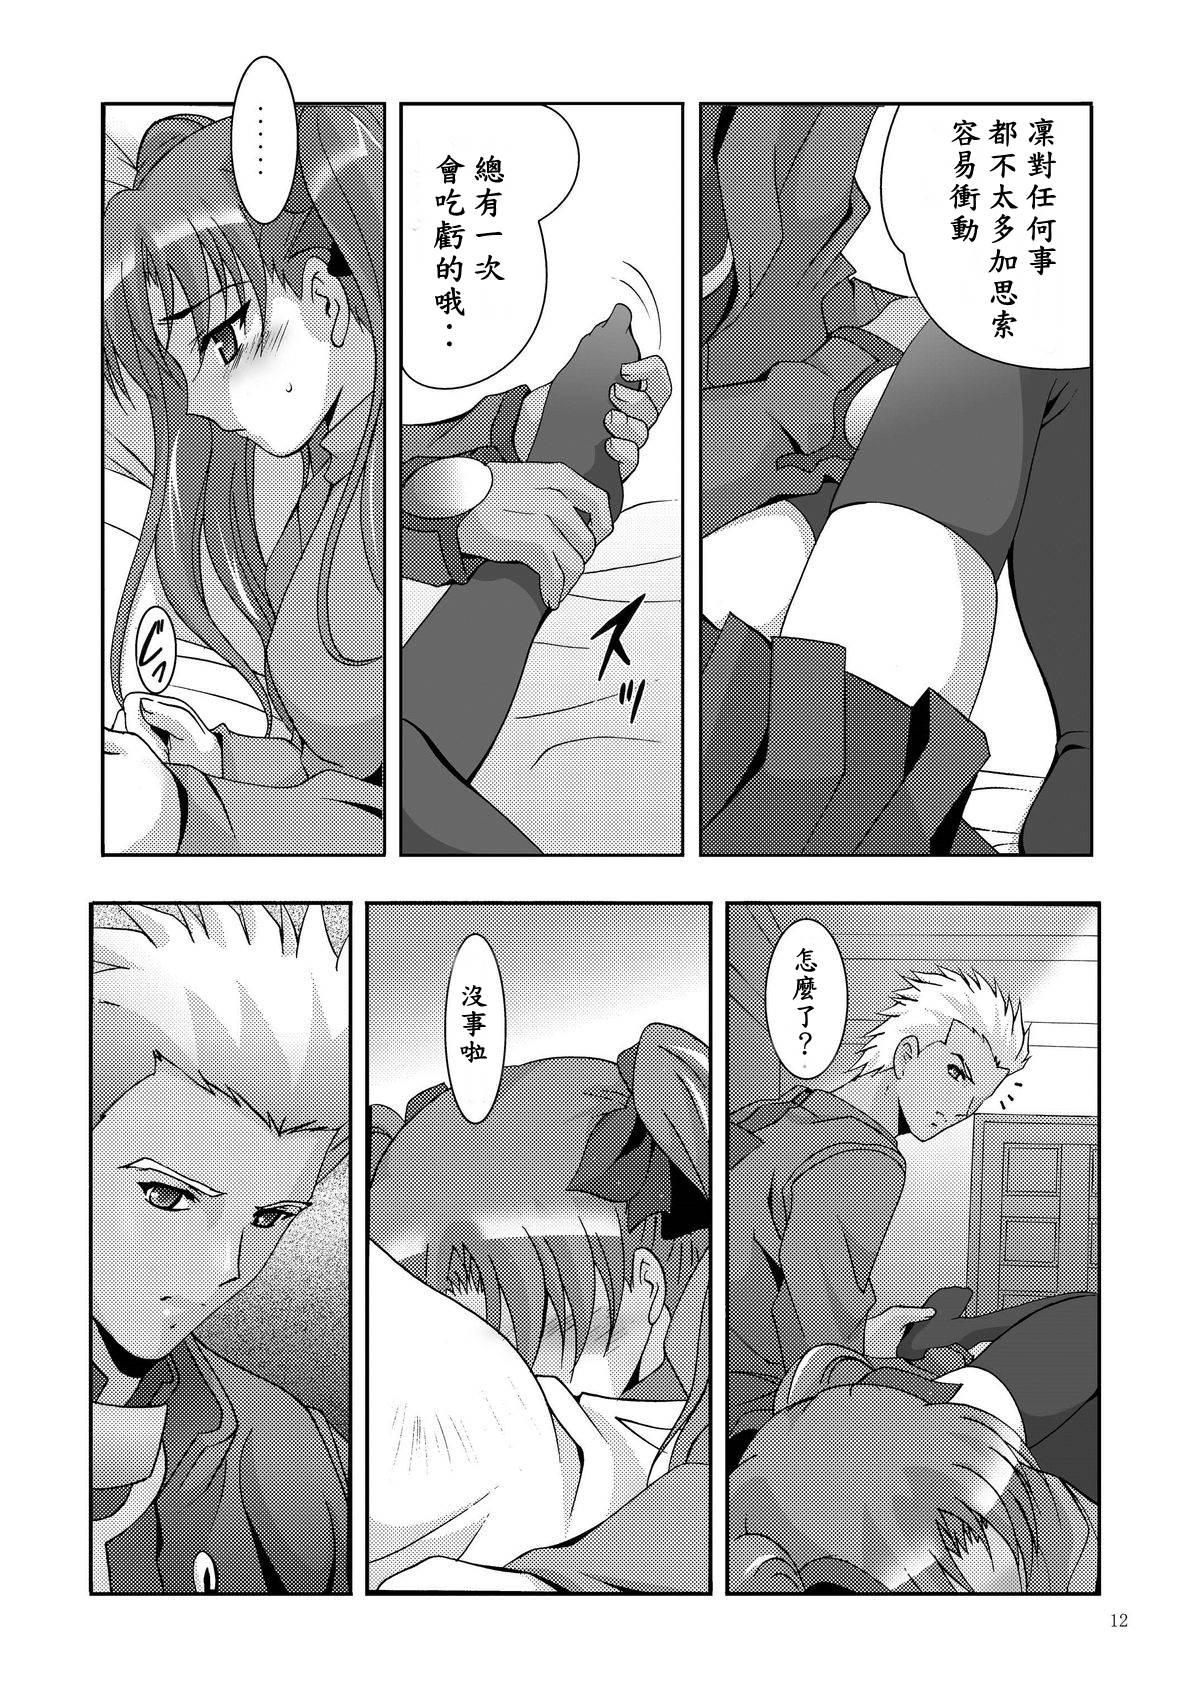 Petite Teenager MOUSOU THEATER 19 - Fate stay night France - Page 10